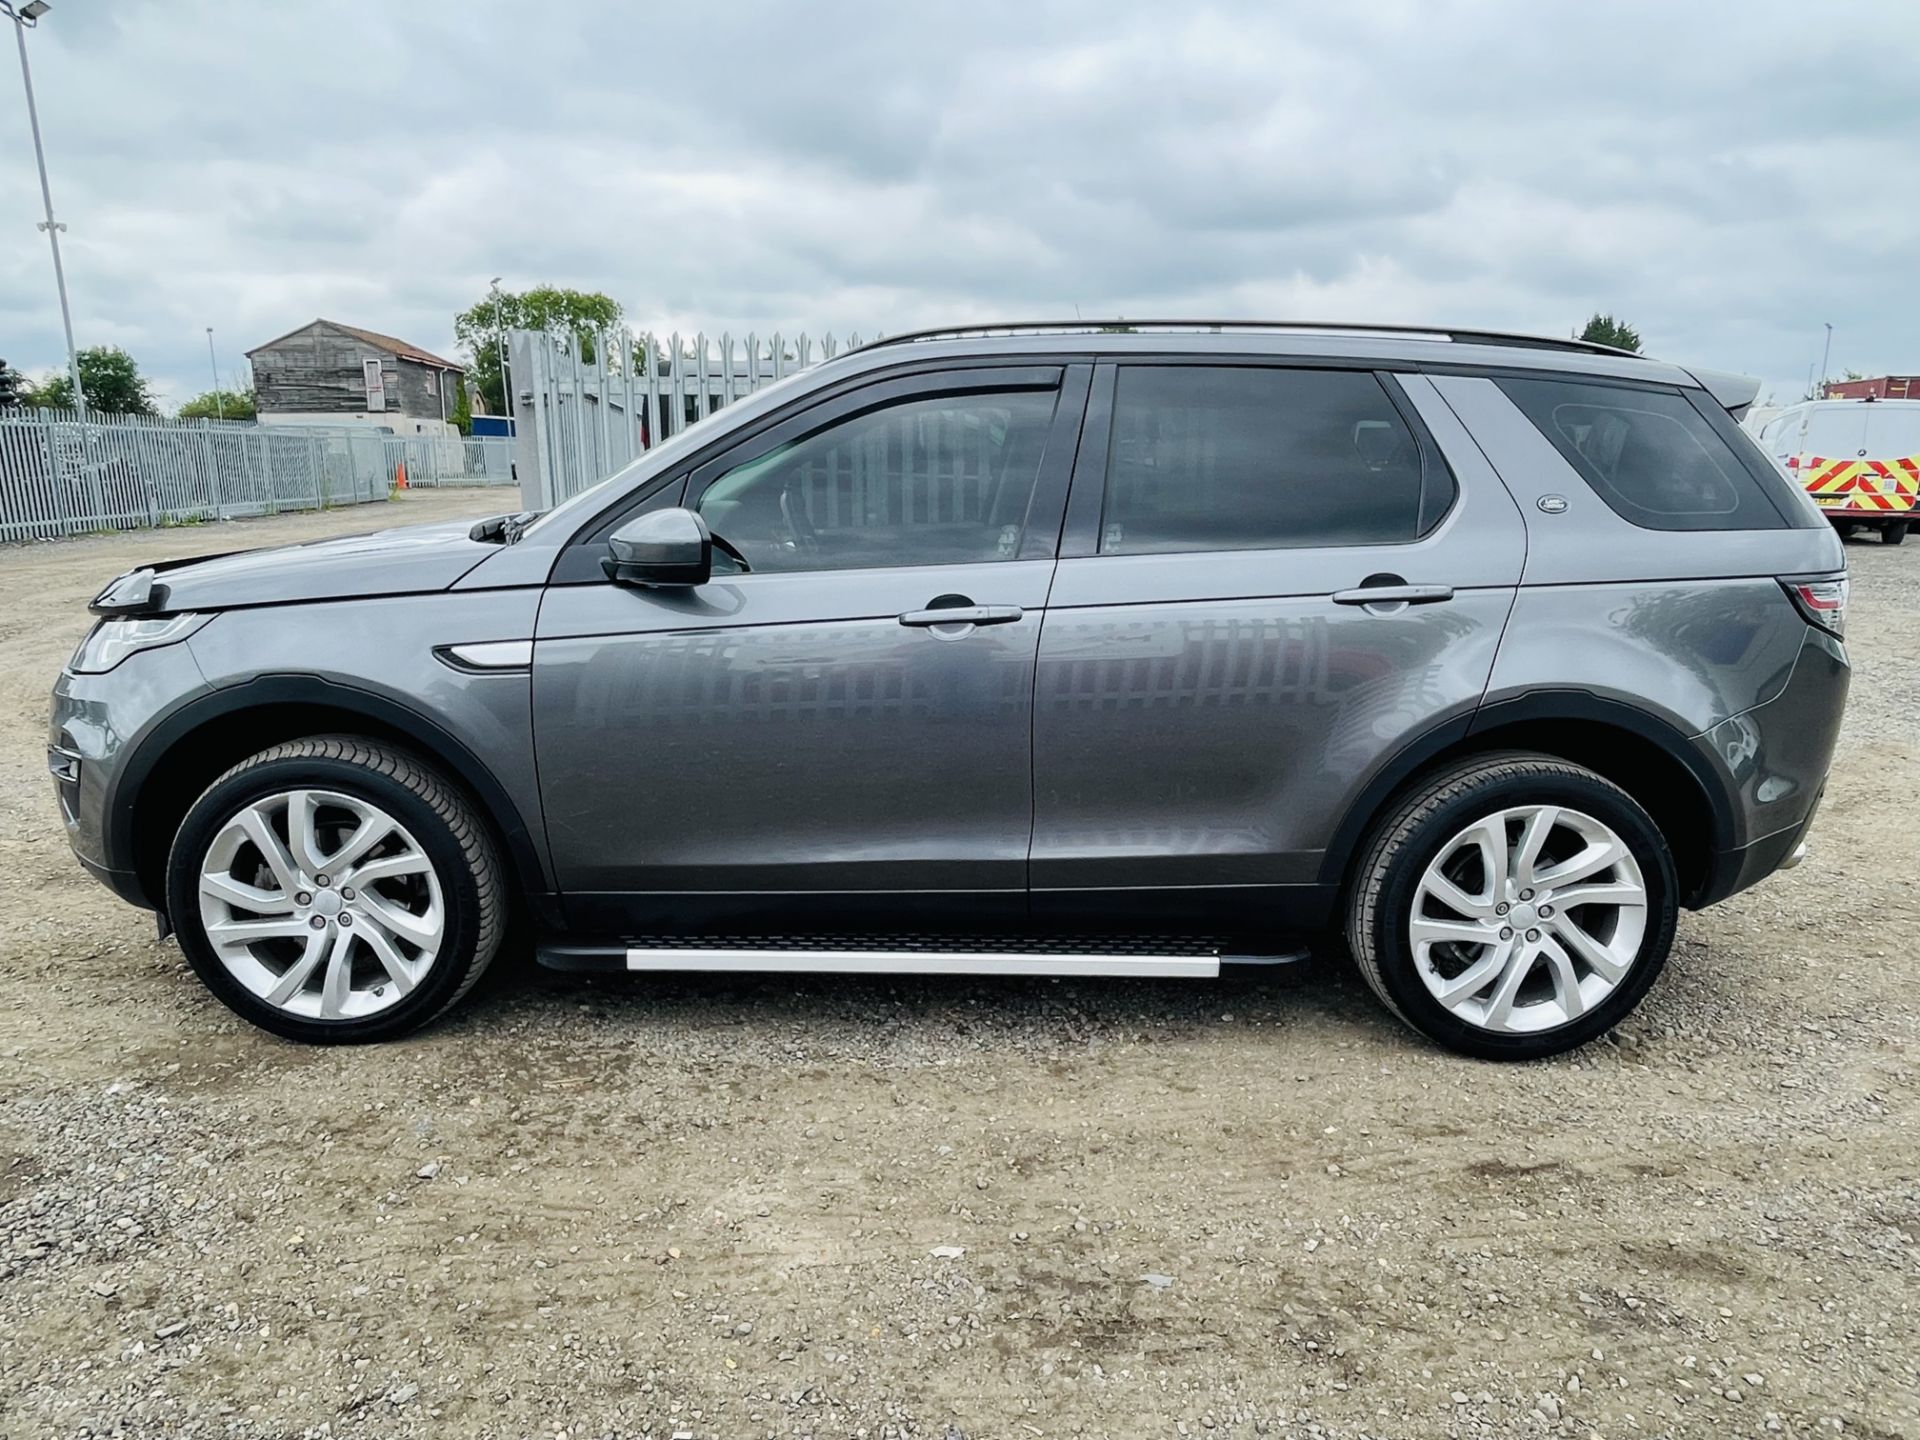 ** ON SALE **Land Rover Discovery sport 2.0 TD4 HSE 2016 '16 Reg' 7 seats - Sat Nav - Euro 6 - - Image 6 of 35